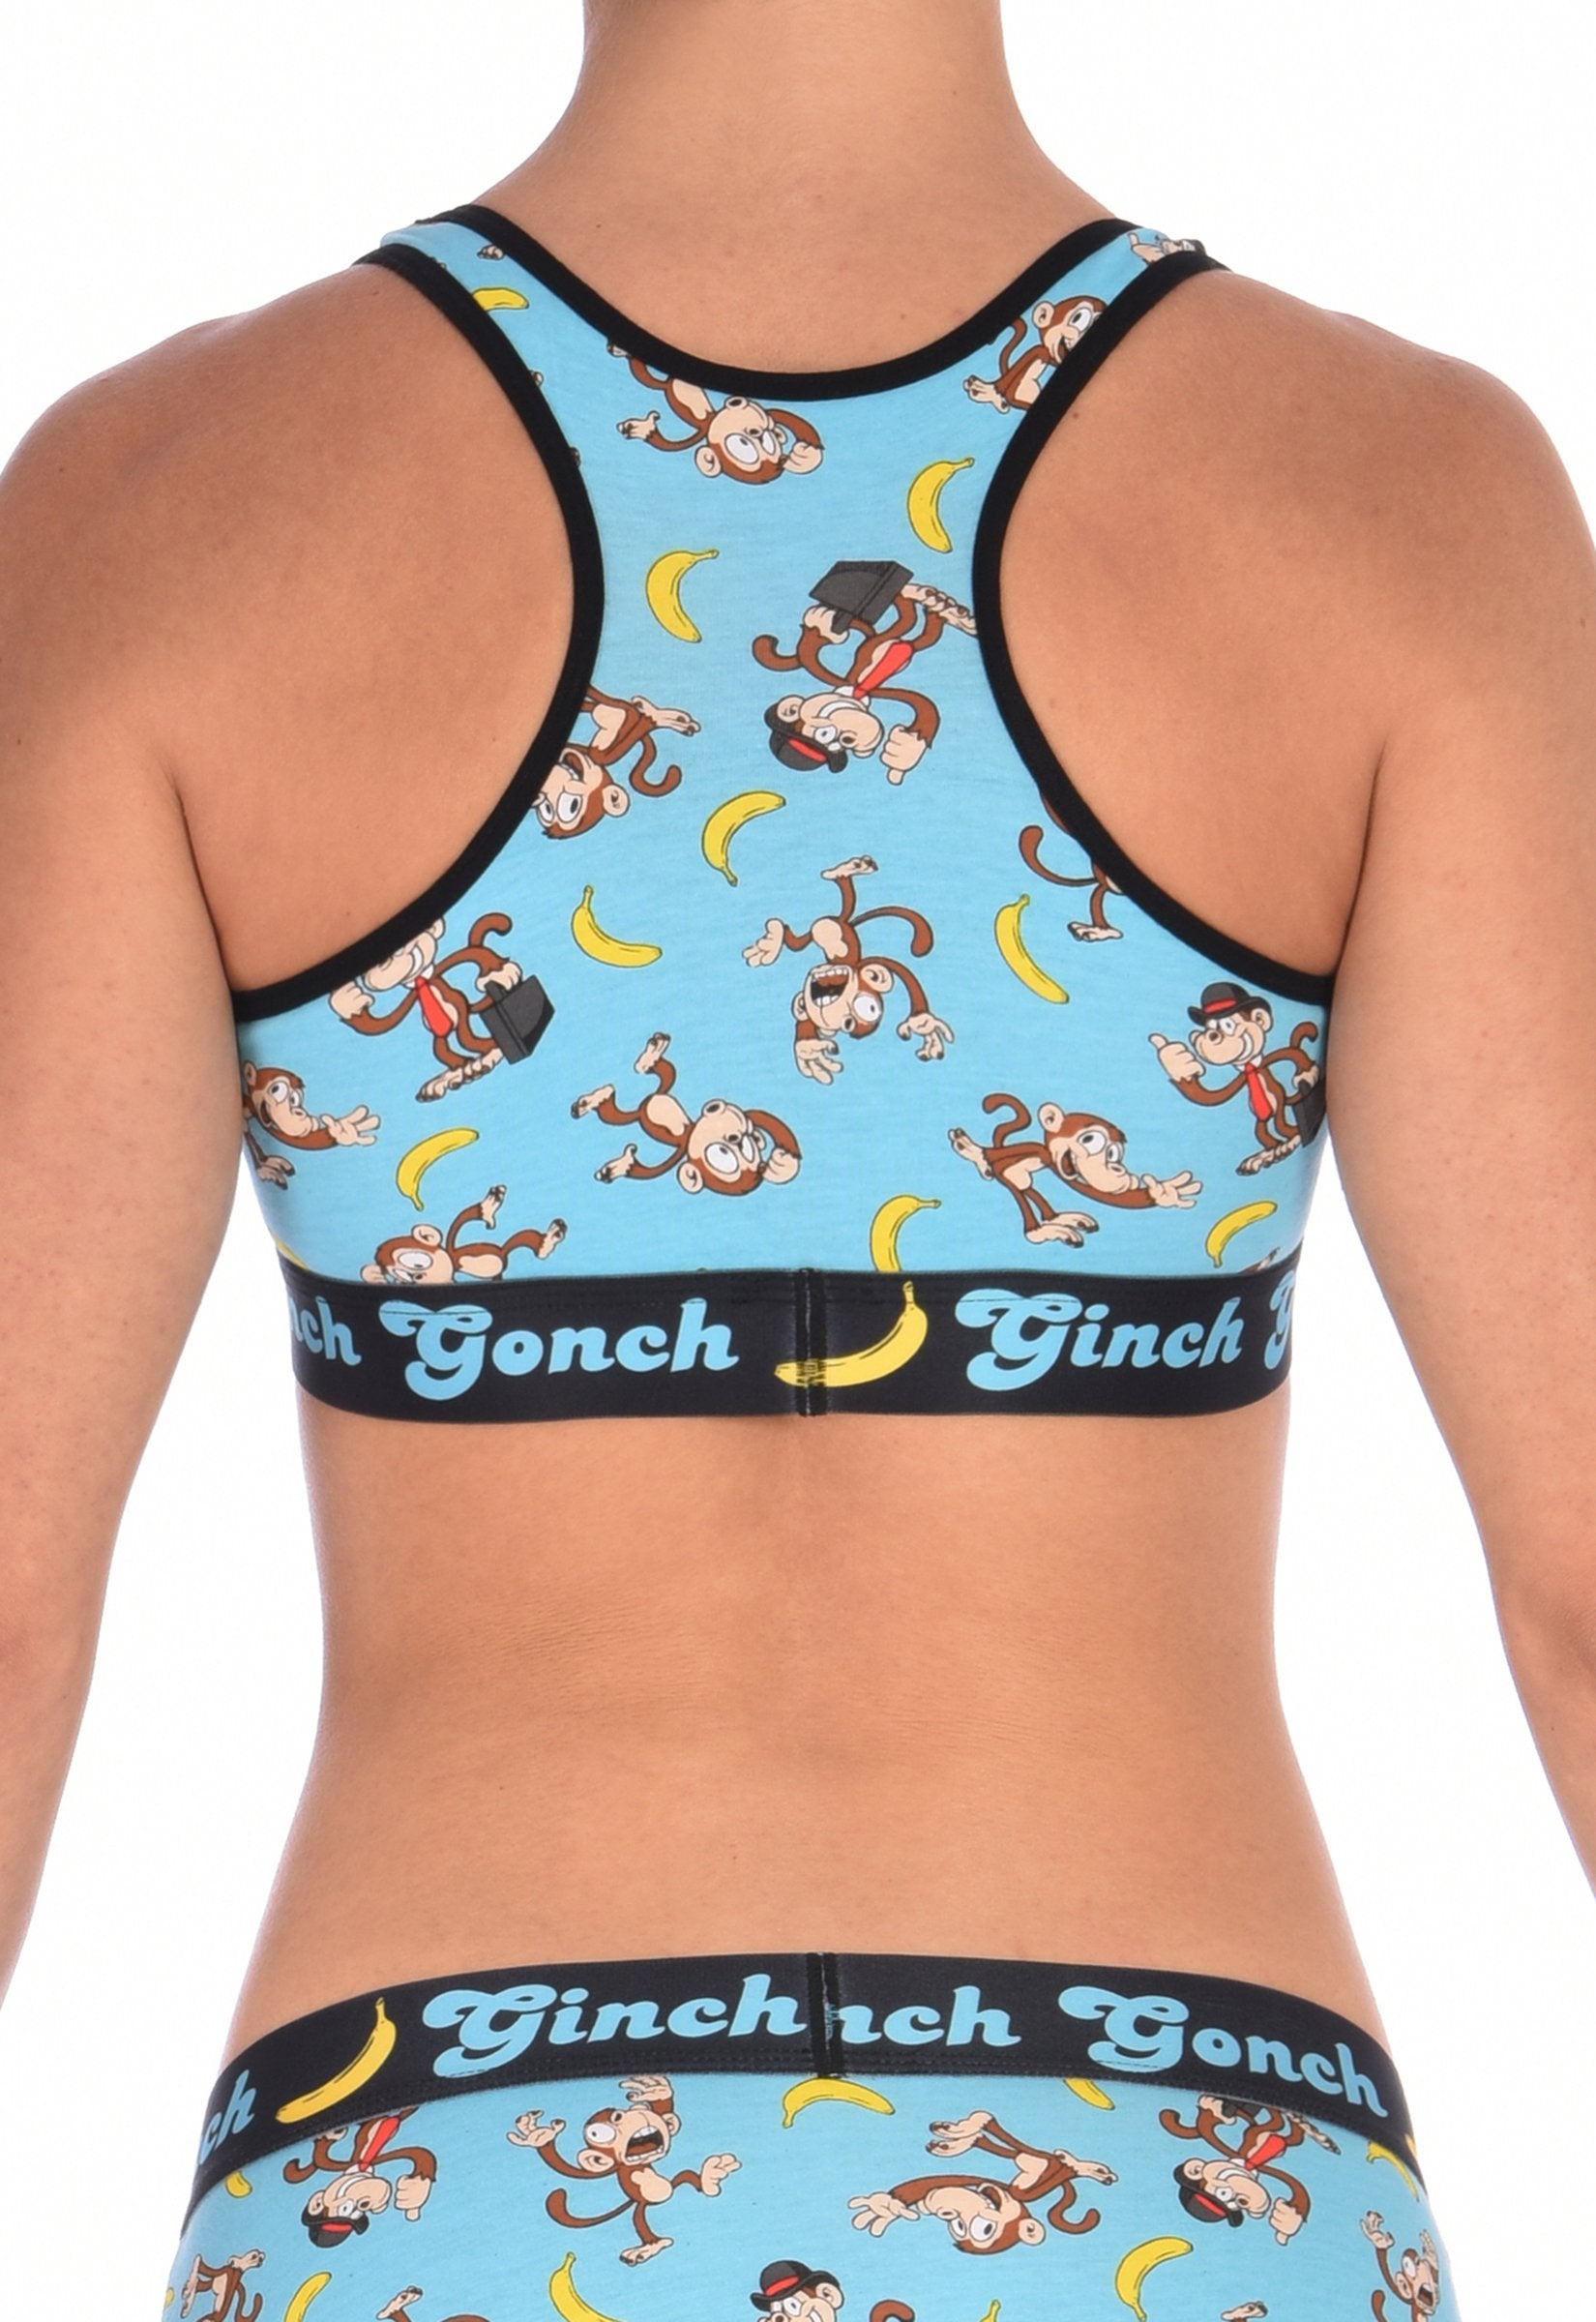 Ginch Gonch Monkey Business Women's Sports Bra Underwear with blue background, monkeys, and bananas. Black trim and printed waistband with Ginch Gonch and bananas. Back.